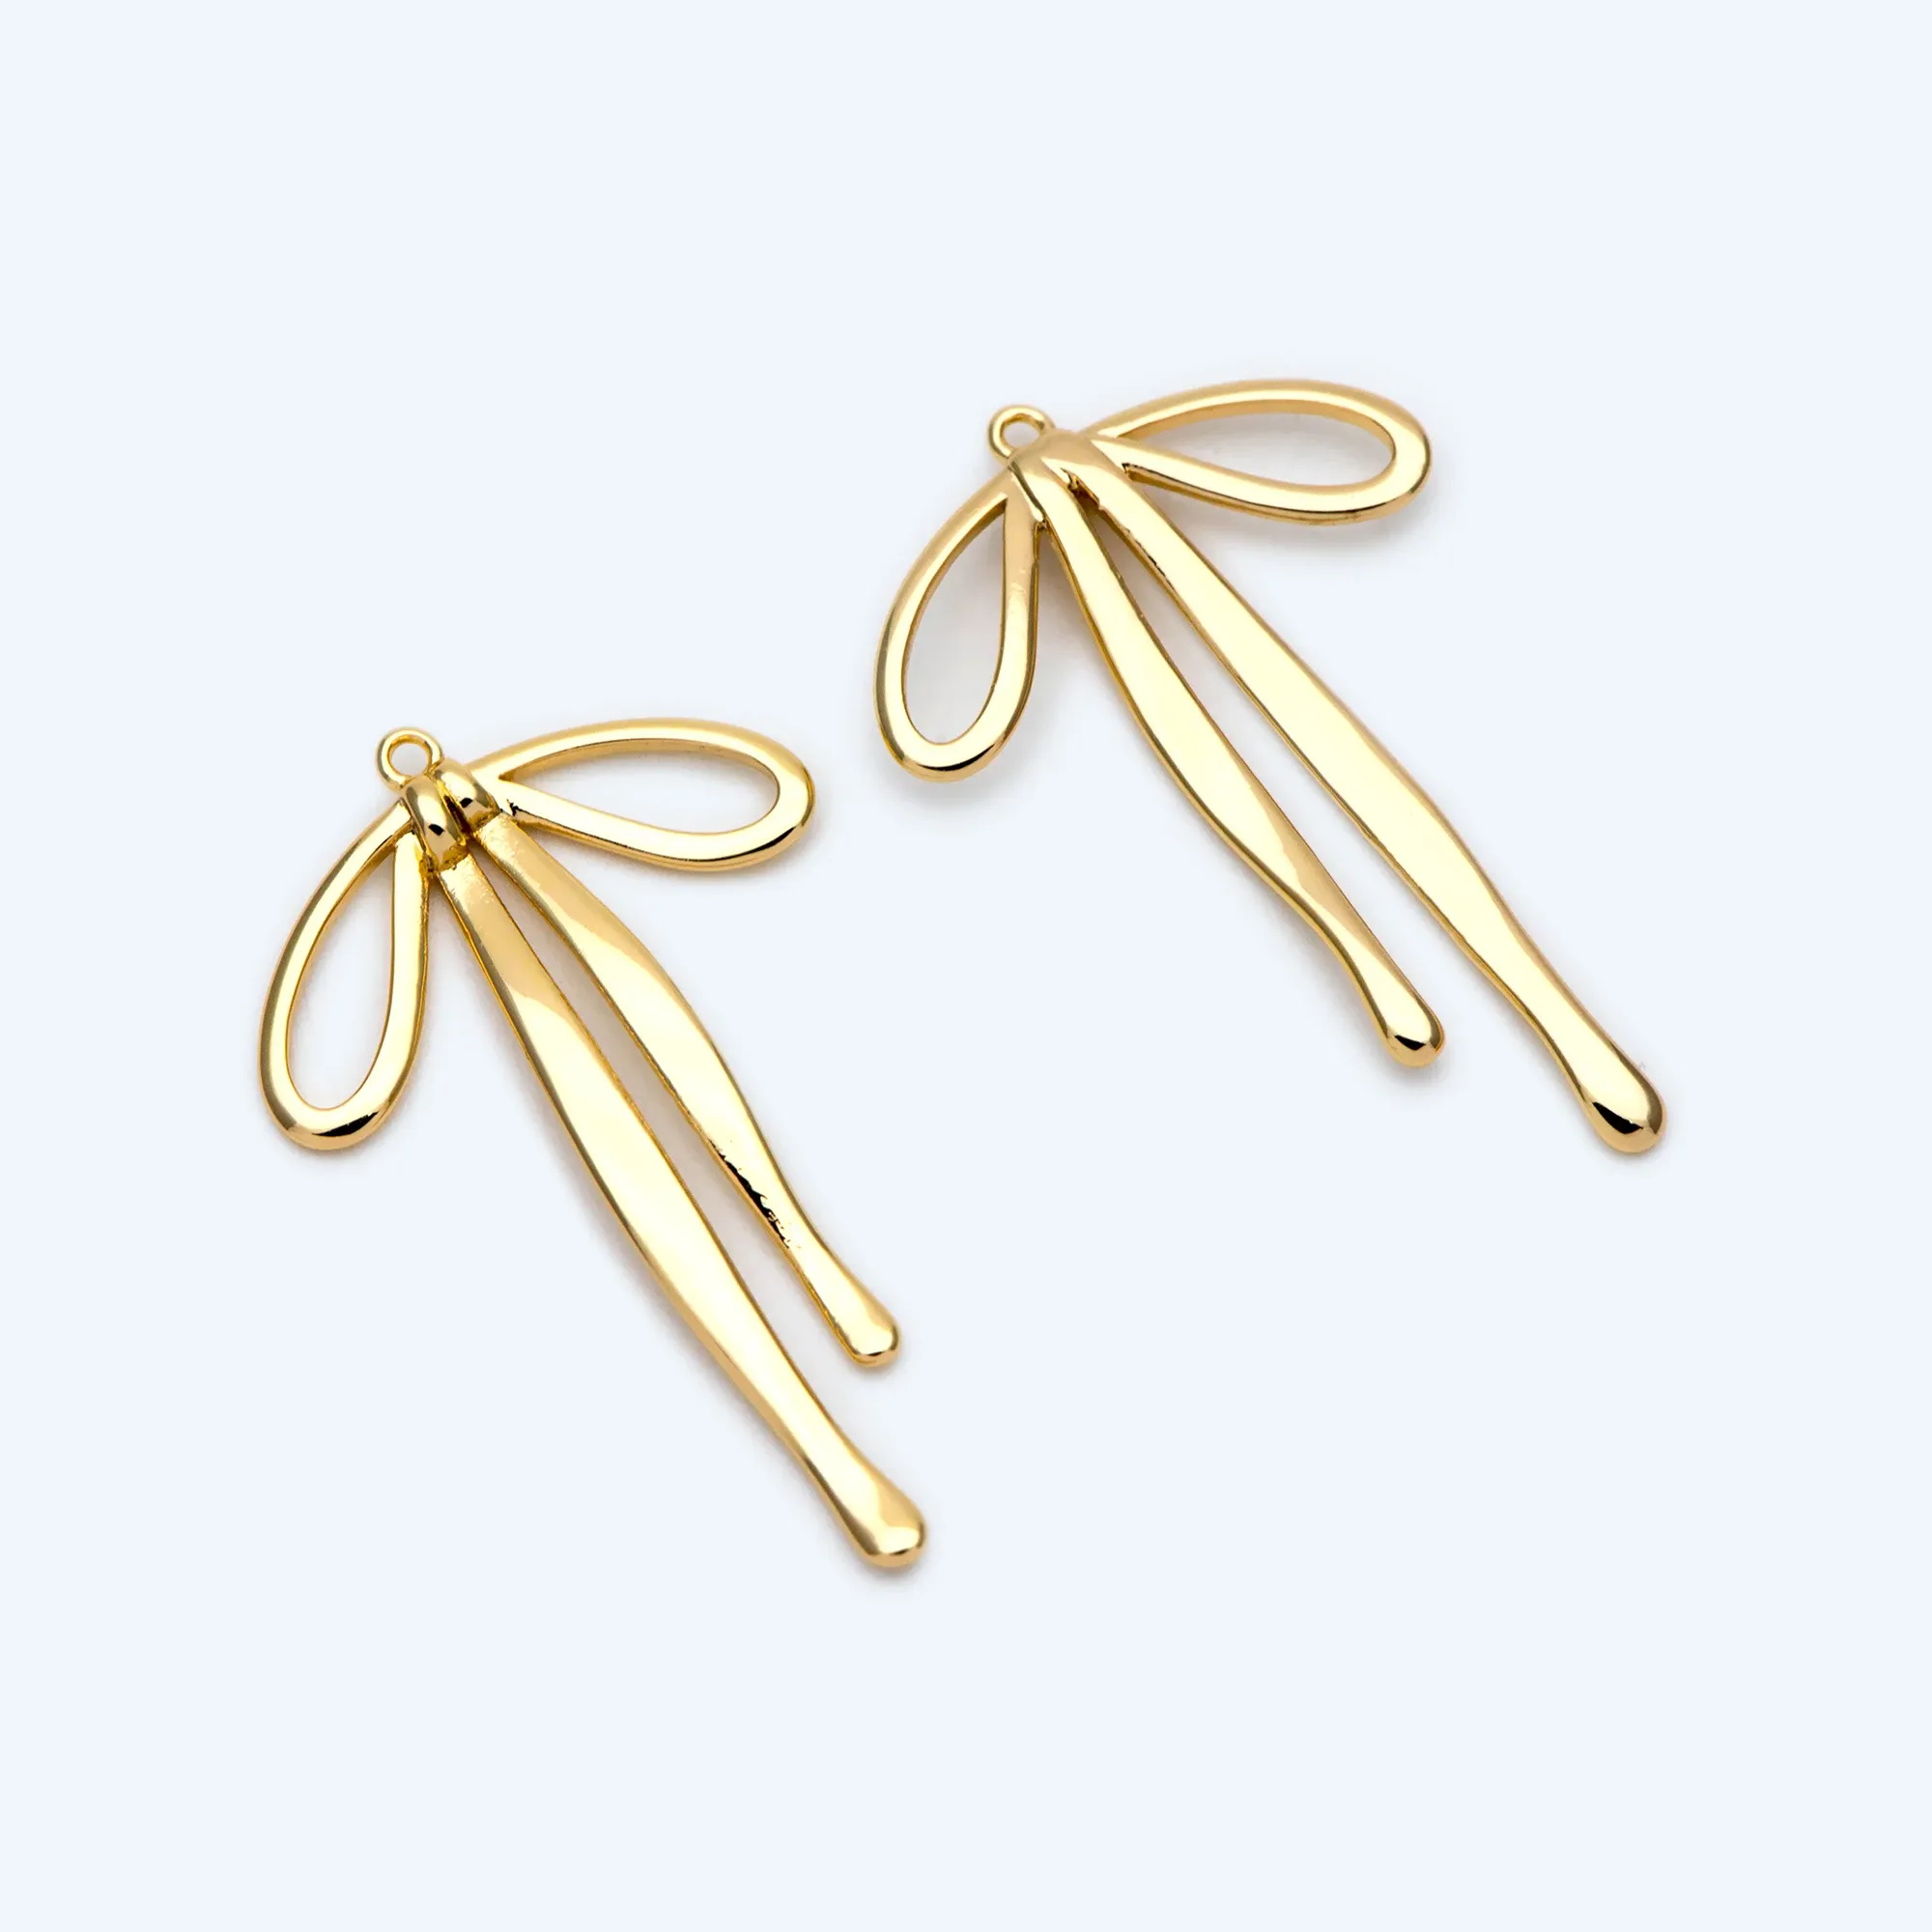 Components 10pcs Gold Bow Knot Charms 33x20mm, 18K Gold Plated Brass Bow Pendant (#GB1744)